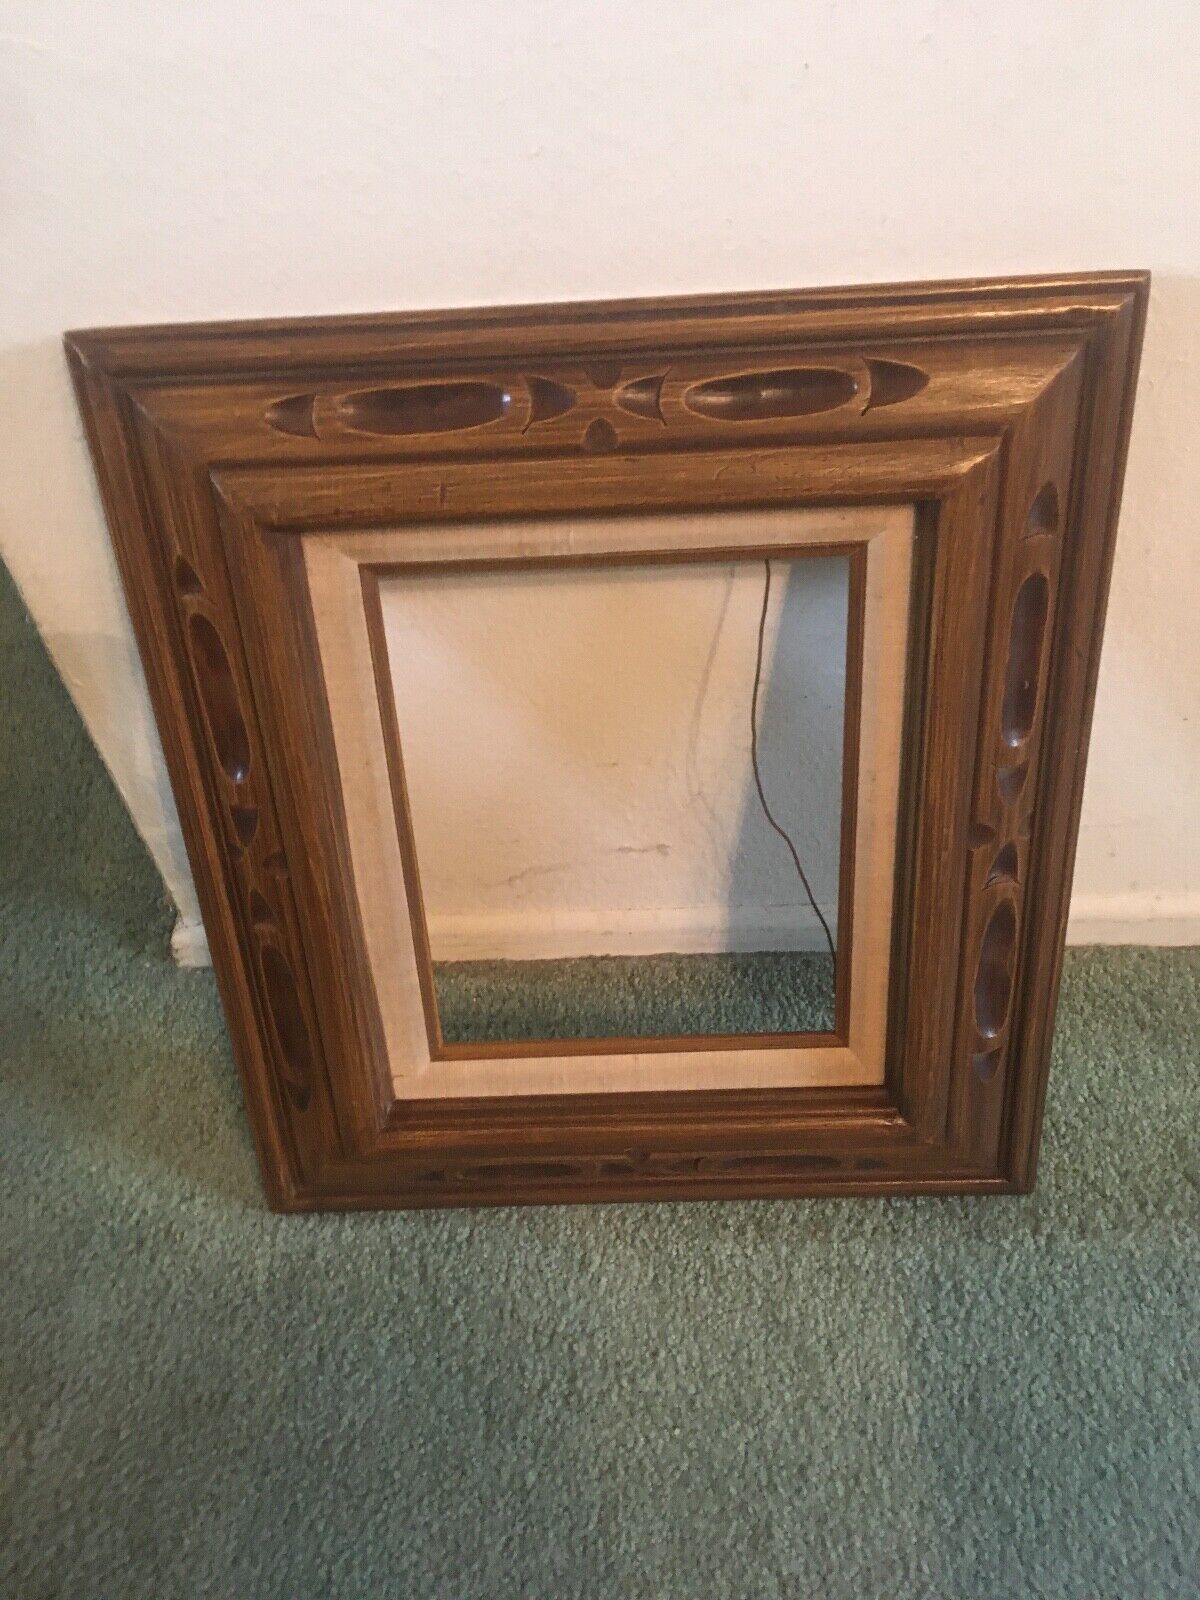 VINTAGE HAND CARVED UNIQUE WOOD FRAME FOR PAINTING  10 X 8 INCH